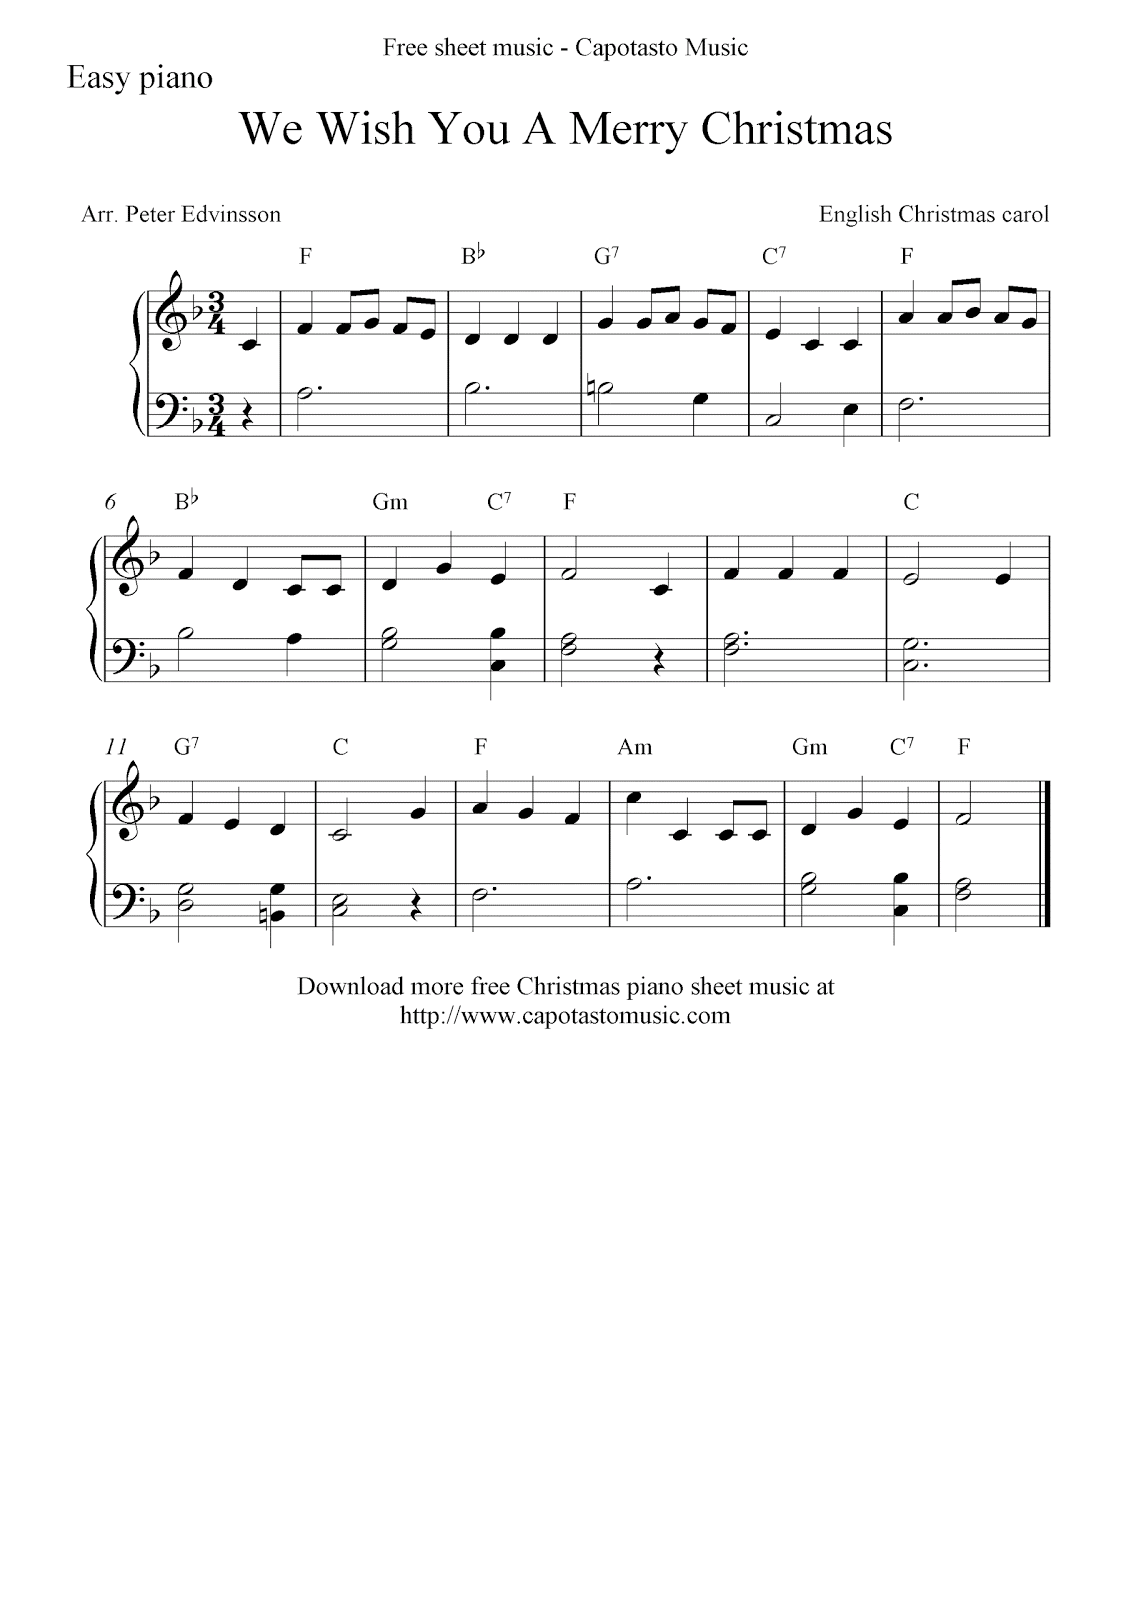 Free Christmas sheet music for easy piano, We Wish You A Merry Christmas